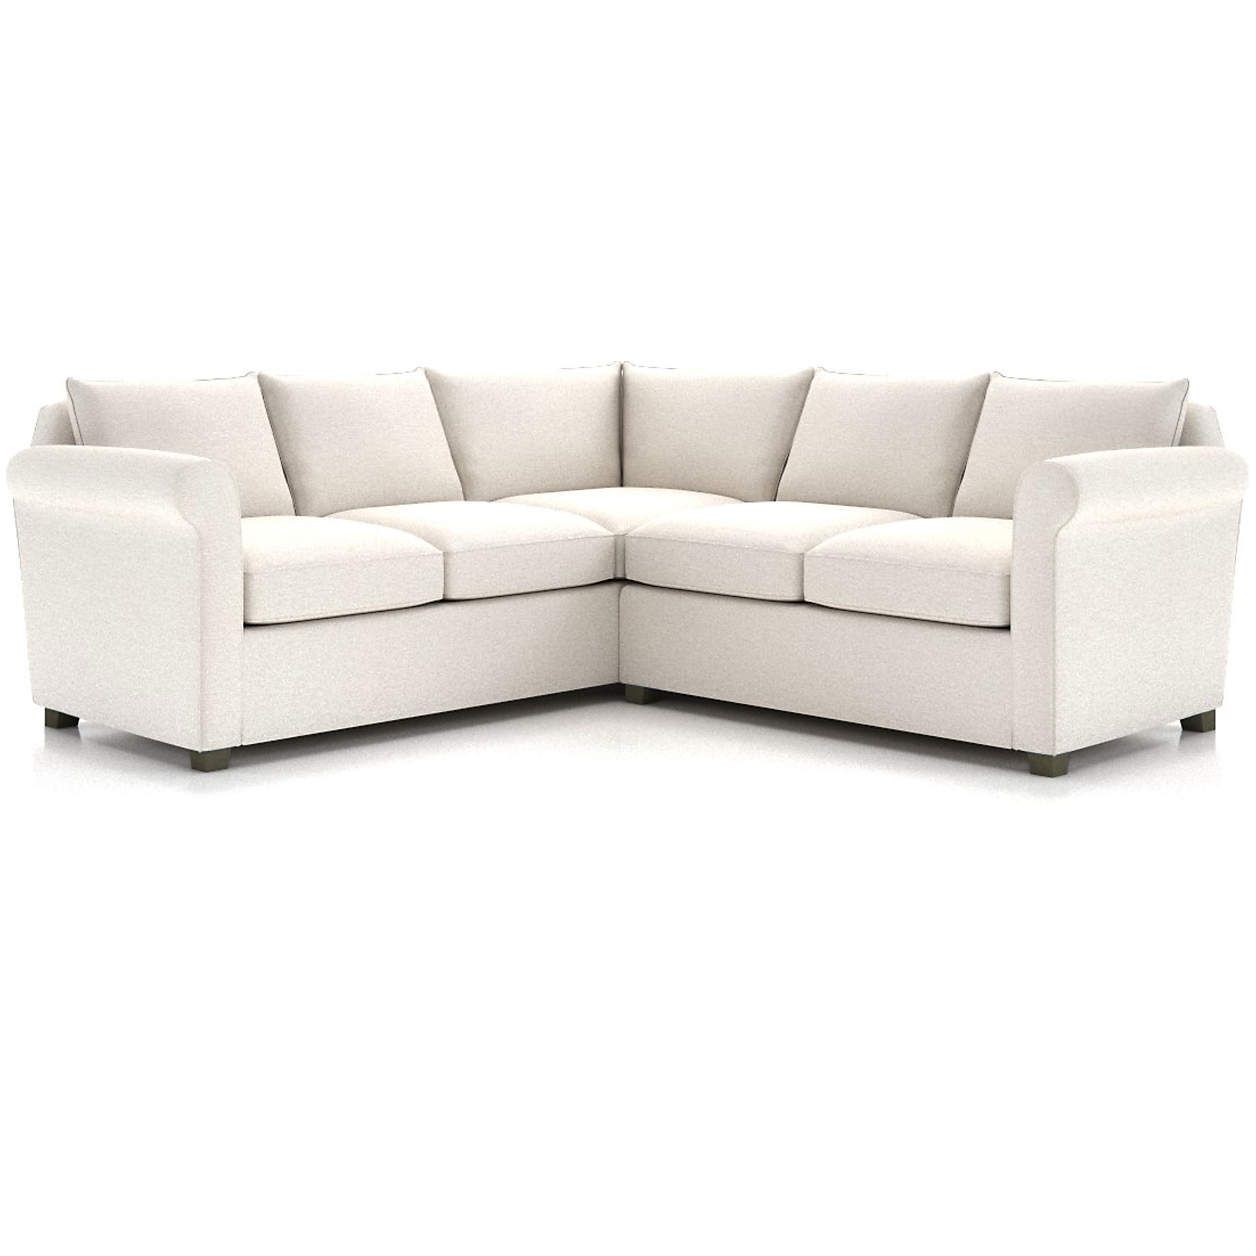 Hayward 2-Piece Left Arm Corner Sofa Rolled Arm Sectional + Reviews | Crate and Barrel | Crate & Barrel